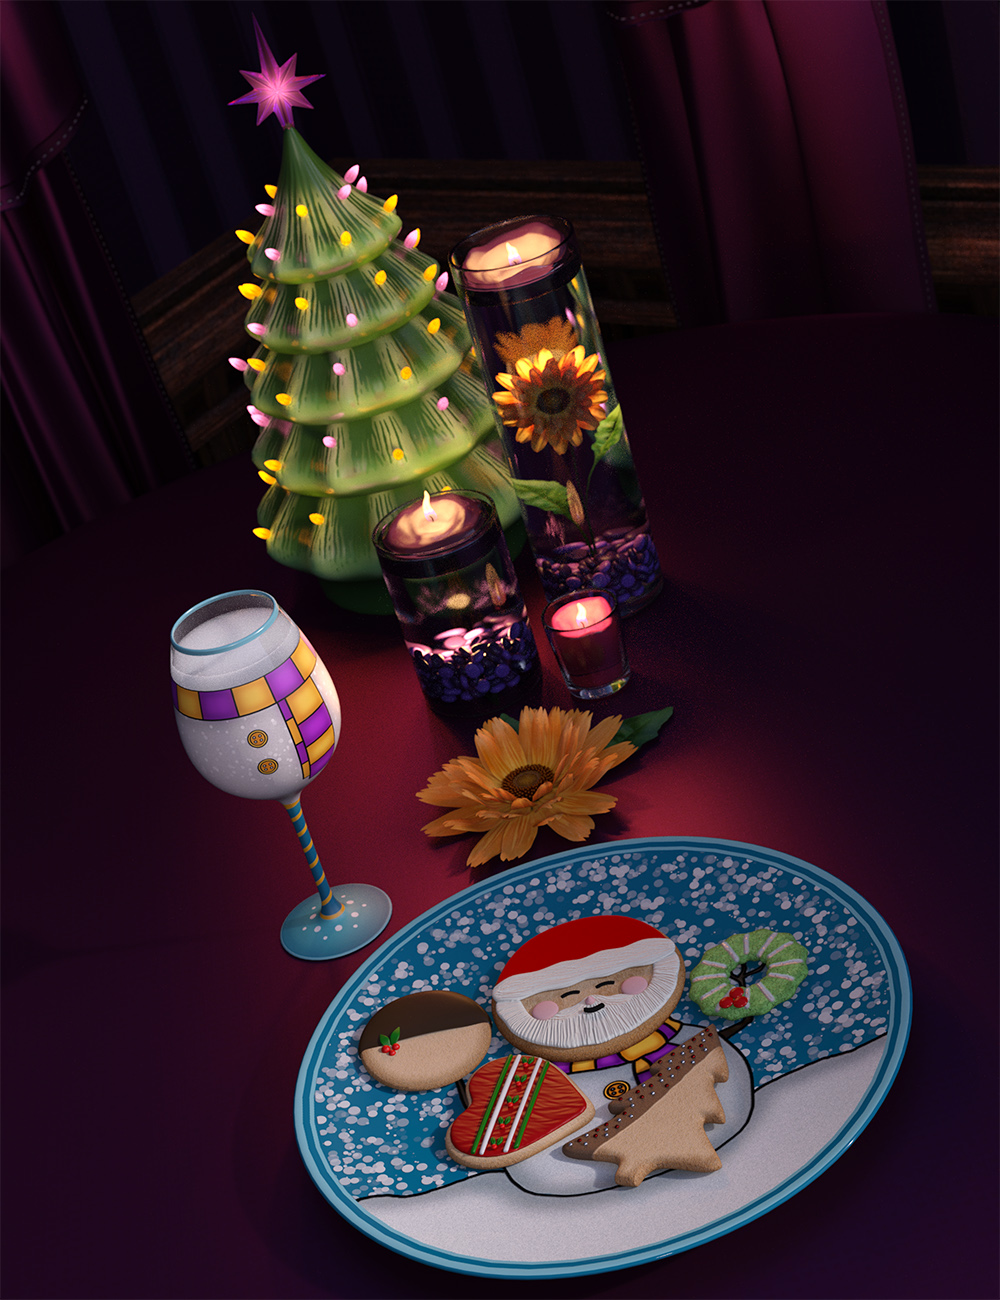 Country Christmas Table Decor by: ARTCollab, 3D Models by Daz 3D